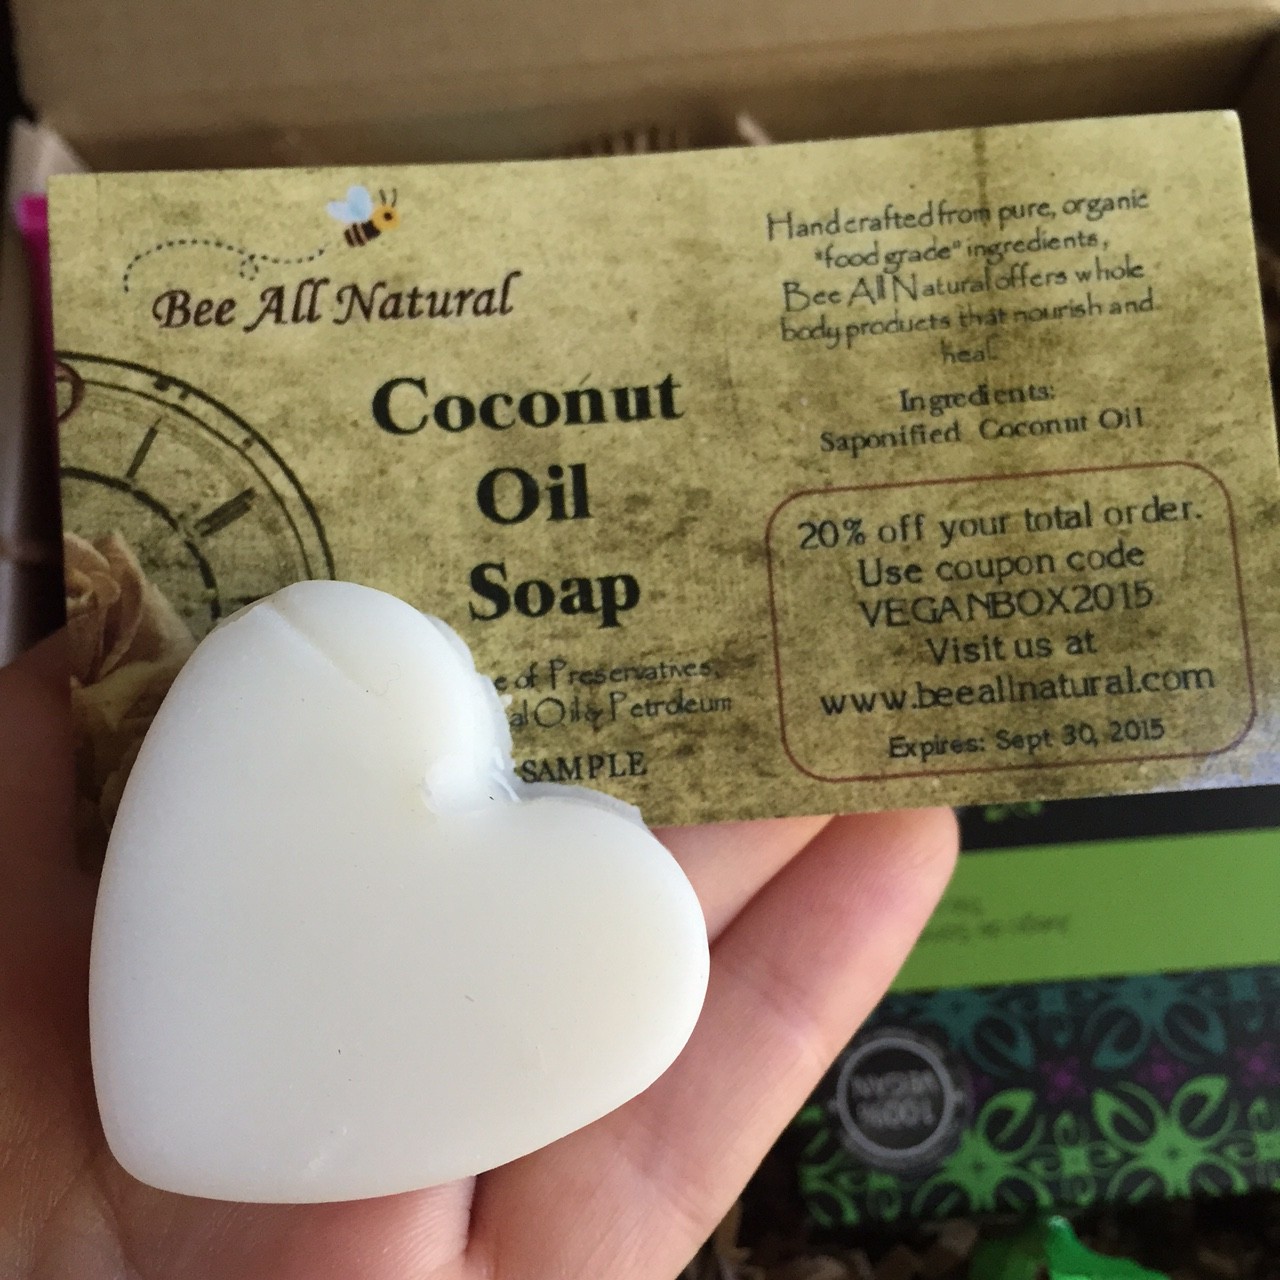 Bee All Natural Coconut Oil Soap